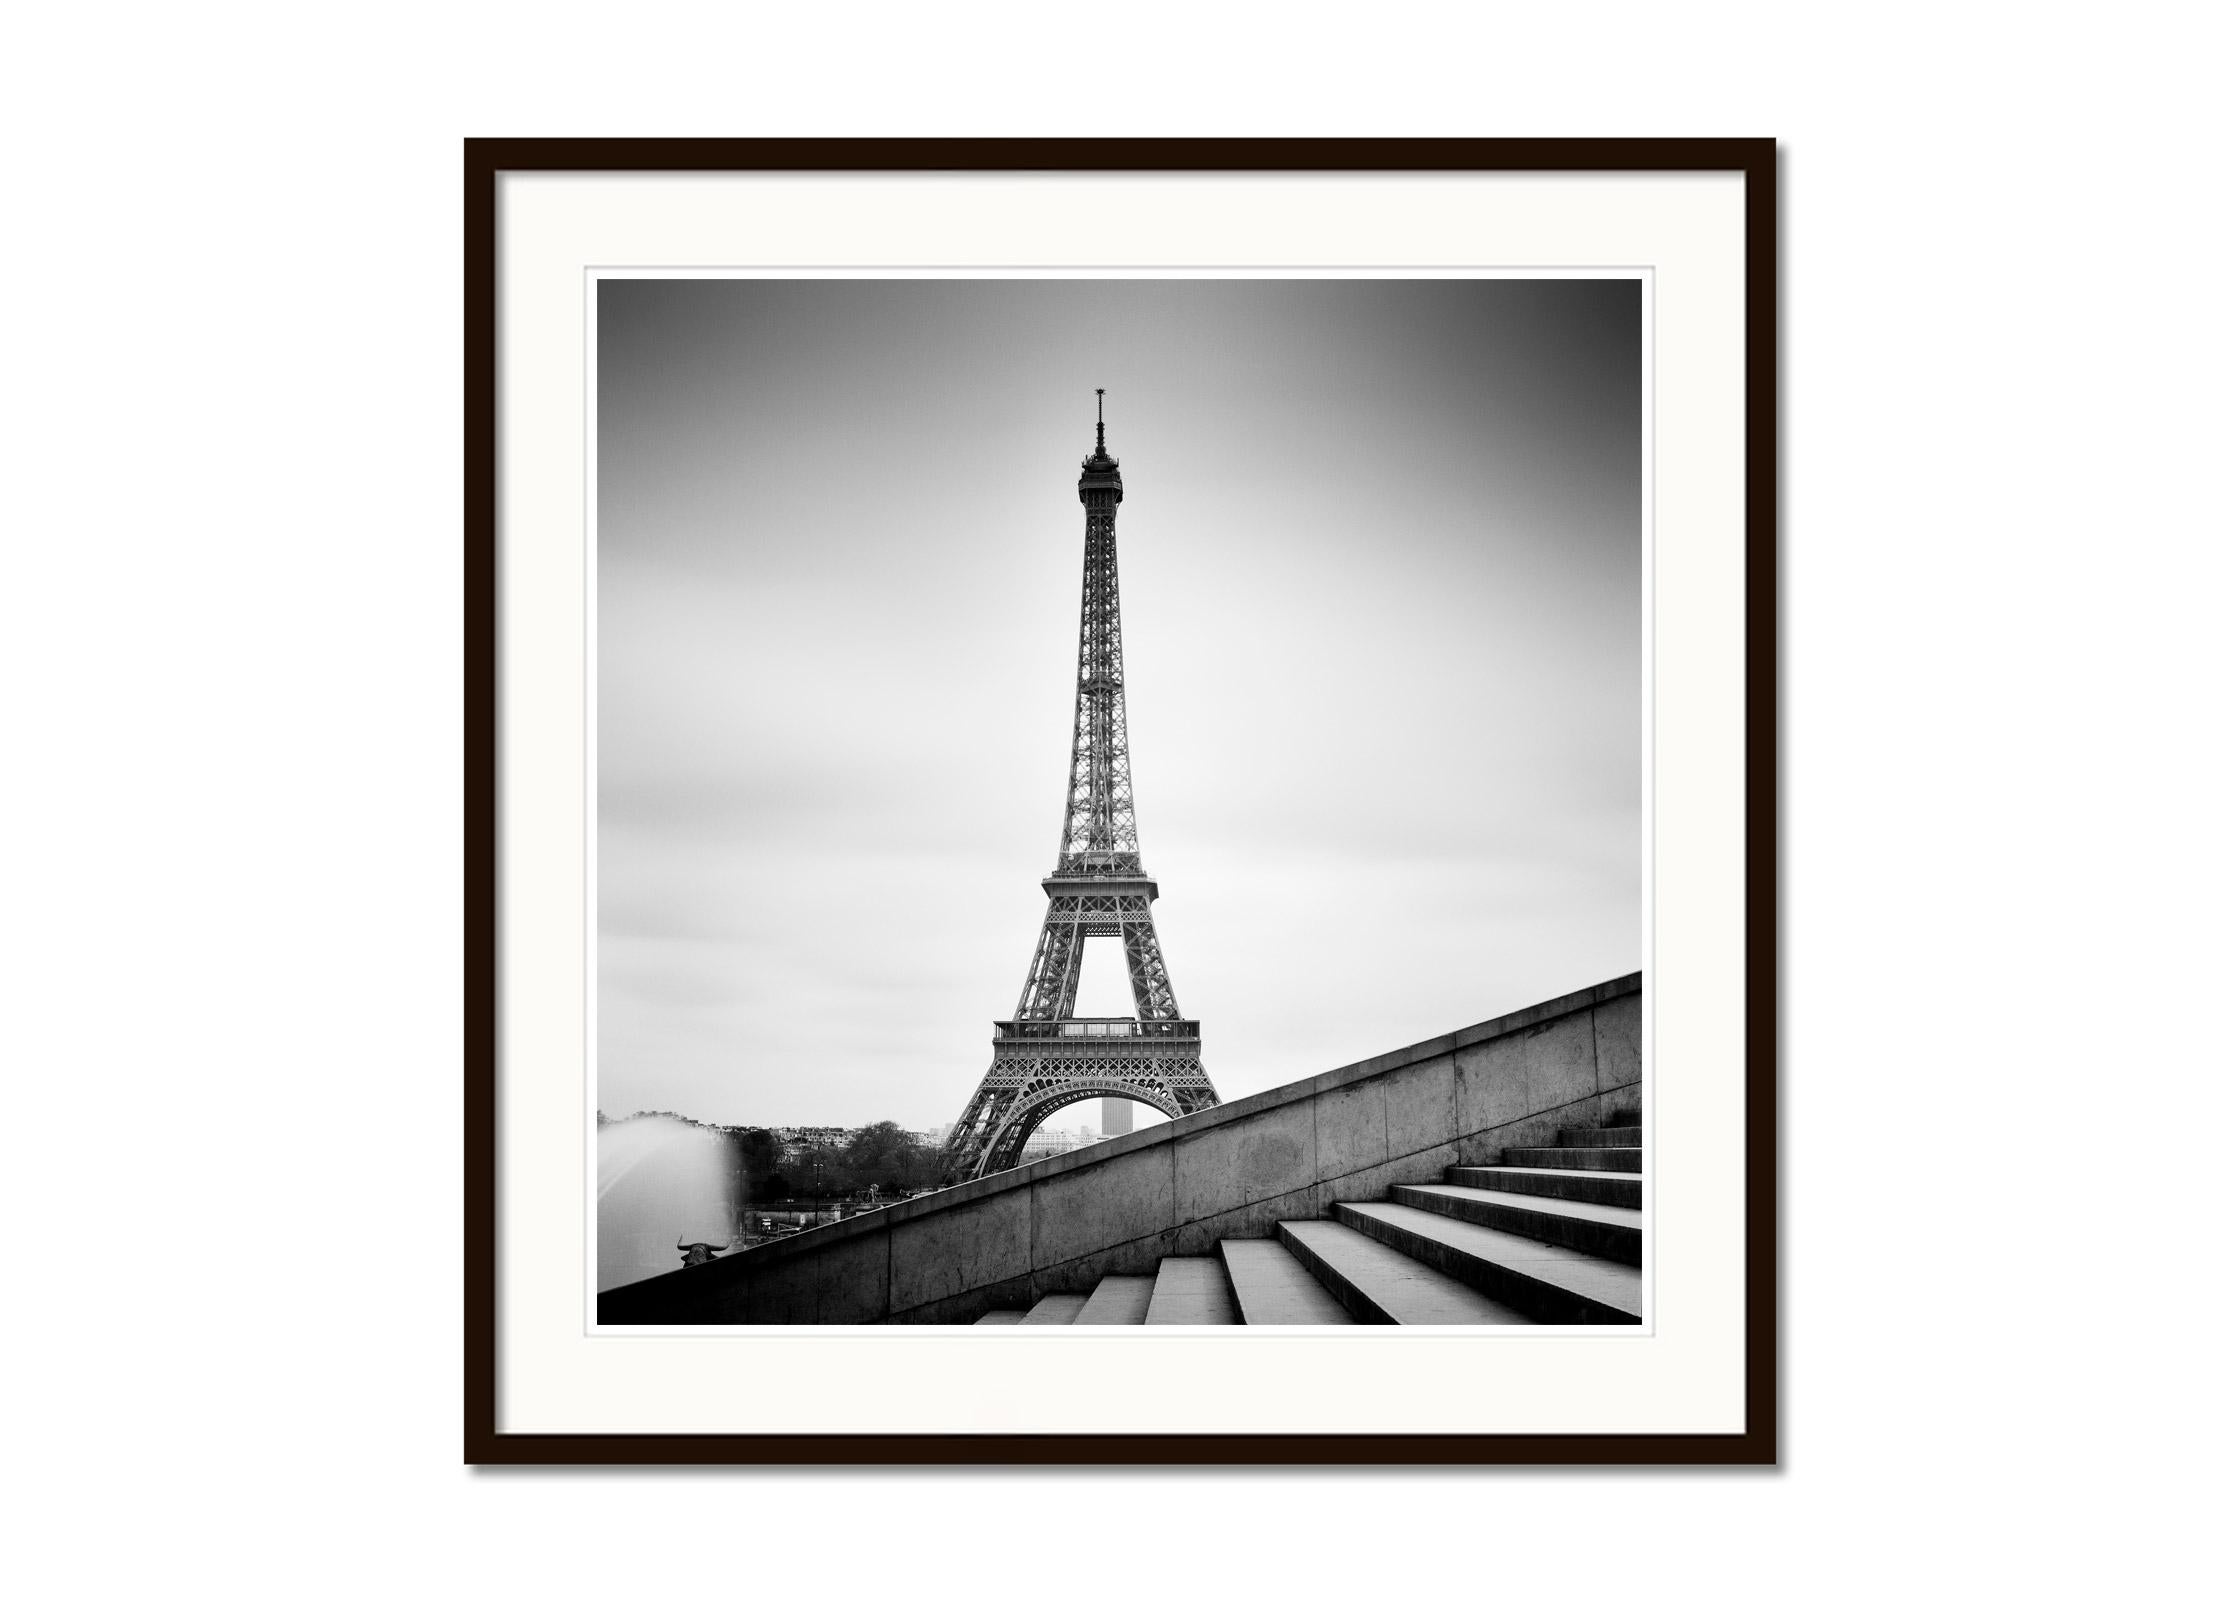 Eiffel Tower, Stairs at the Trocadero, Paris, black and white cityscape print - Contemporary Photograph by Gerald Berghammer